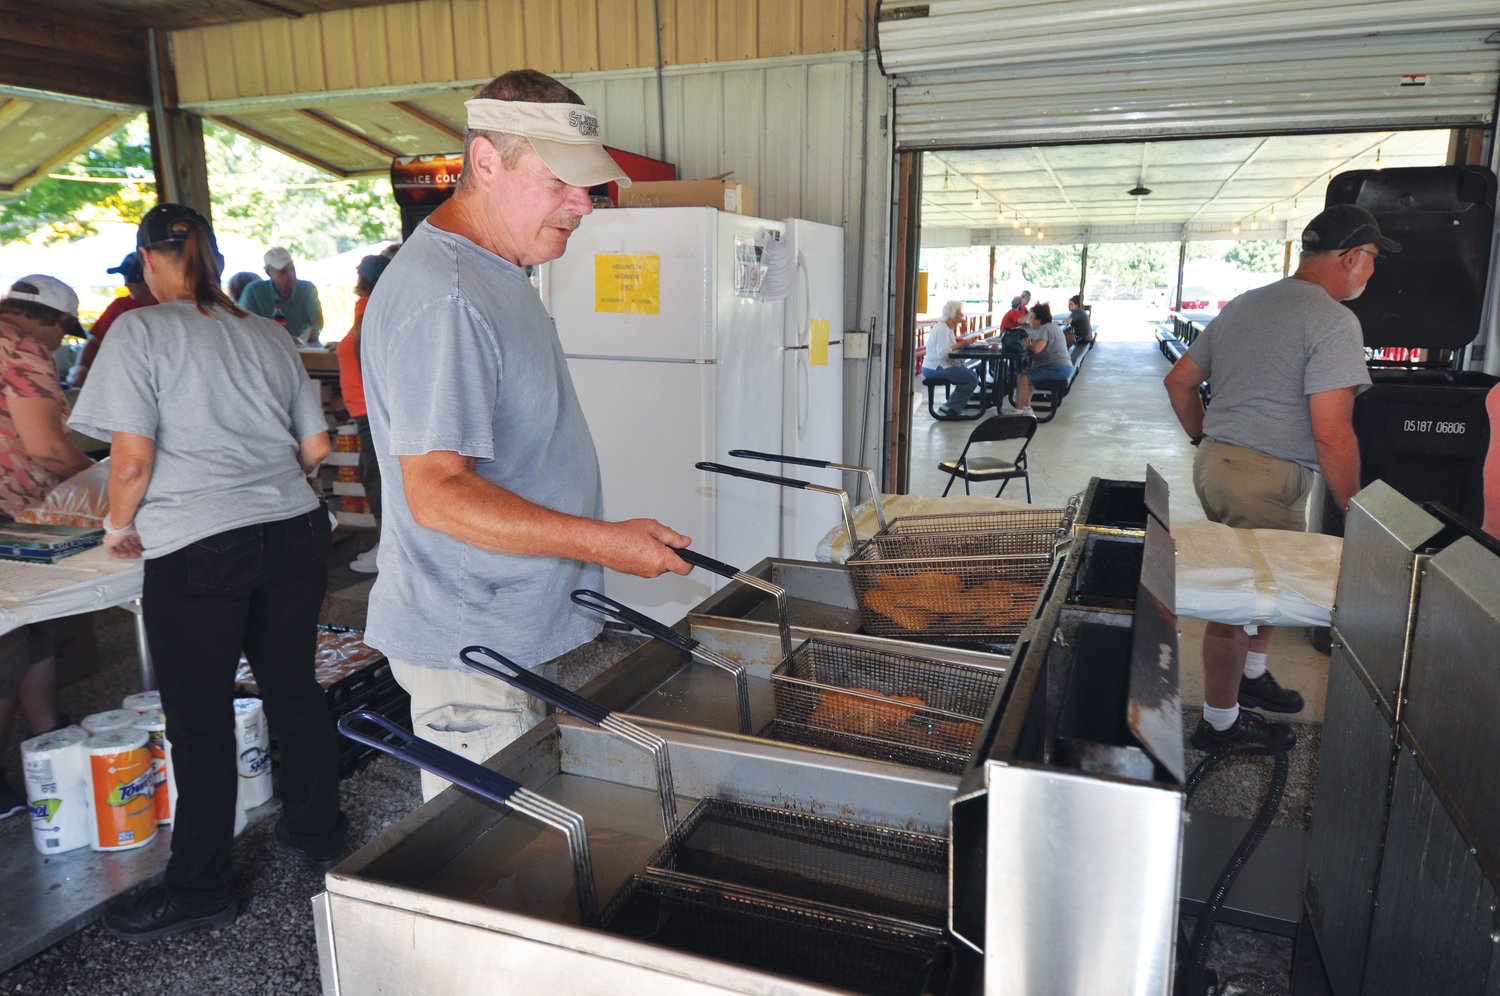 Steve Proctor takes fish out of the fryer at the Waynetown Fish Fry.